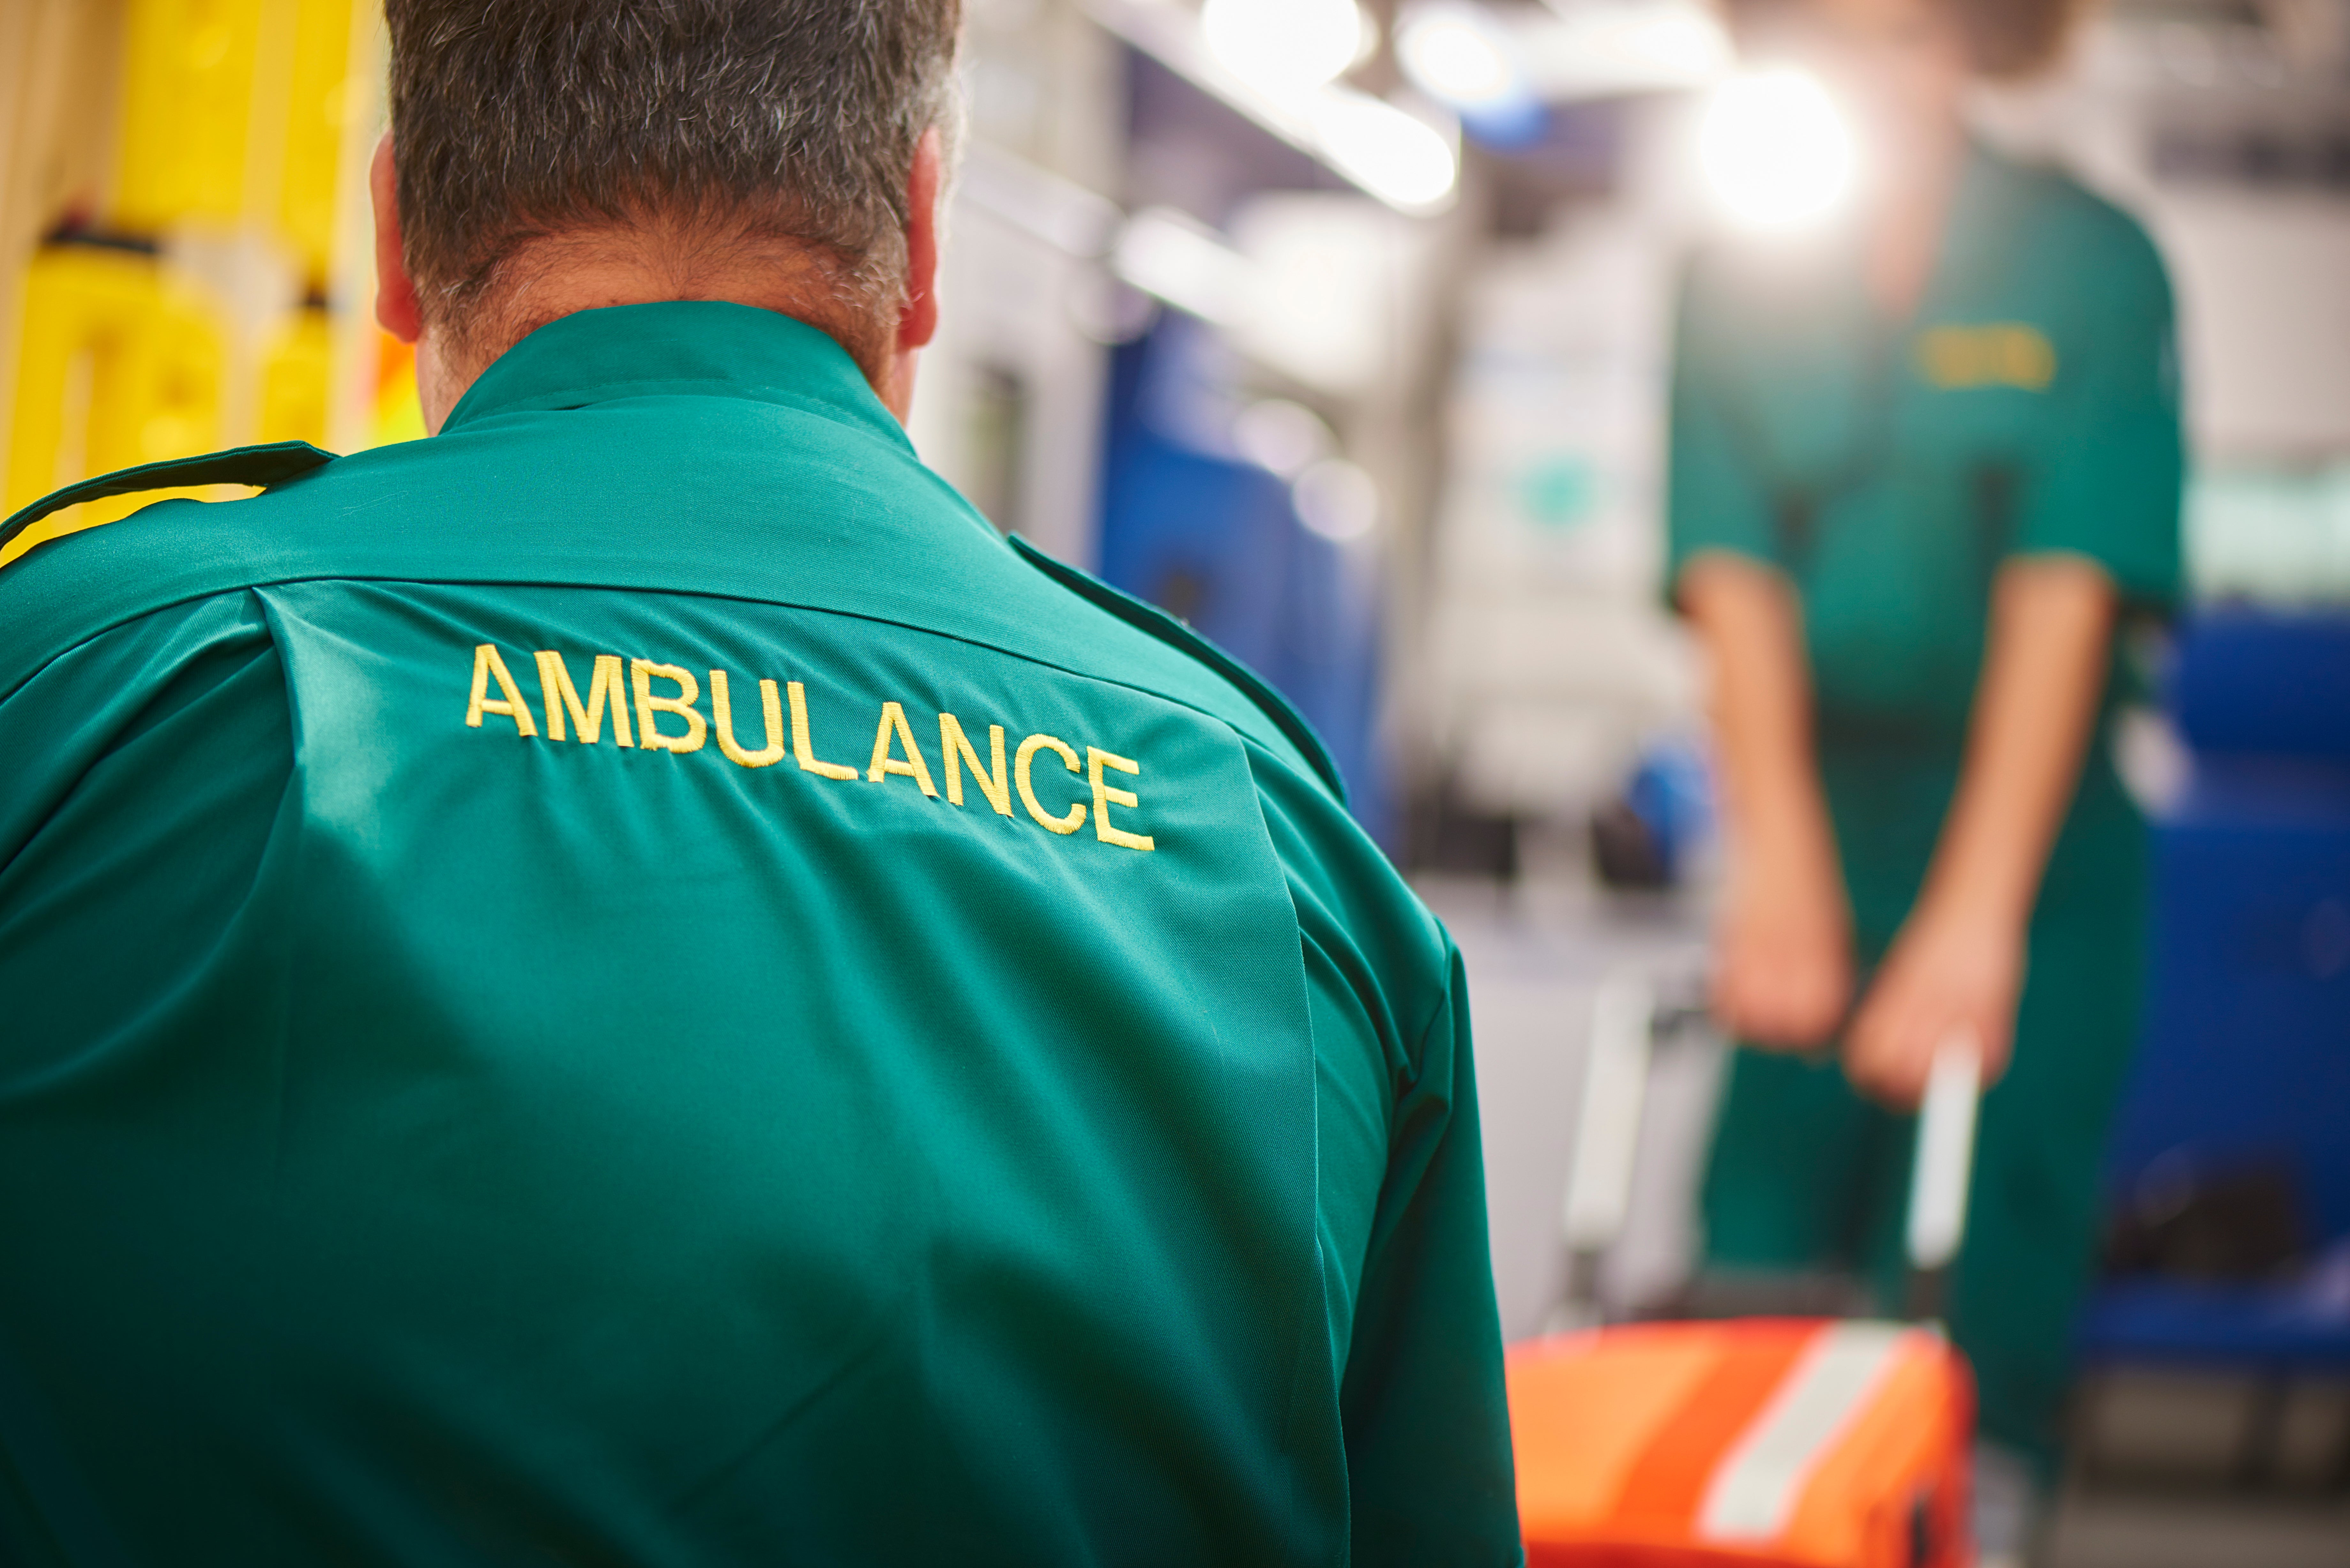 Around 10,000 patients a day are seen by ambulance workers who are unregulated